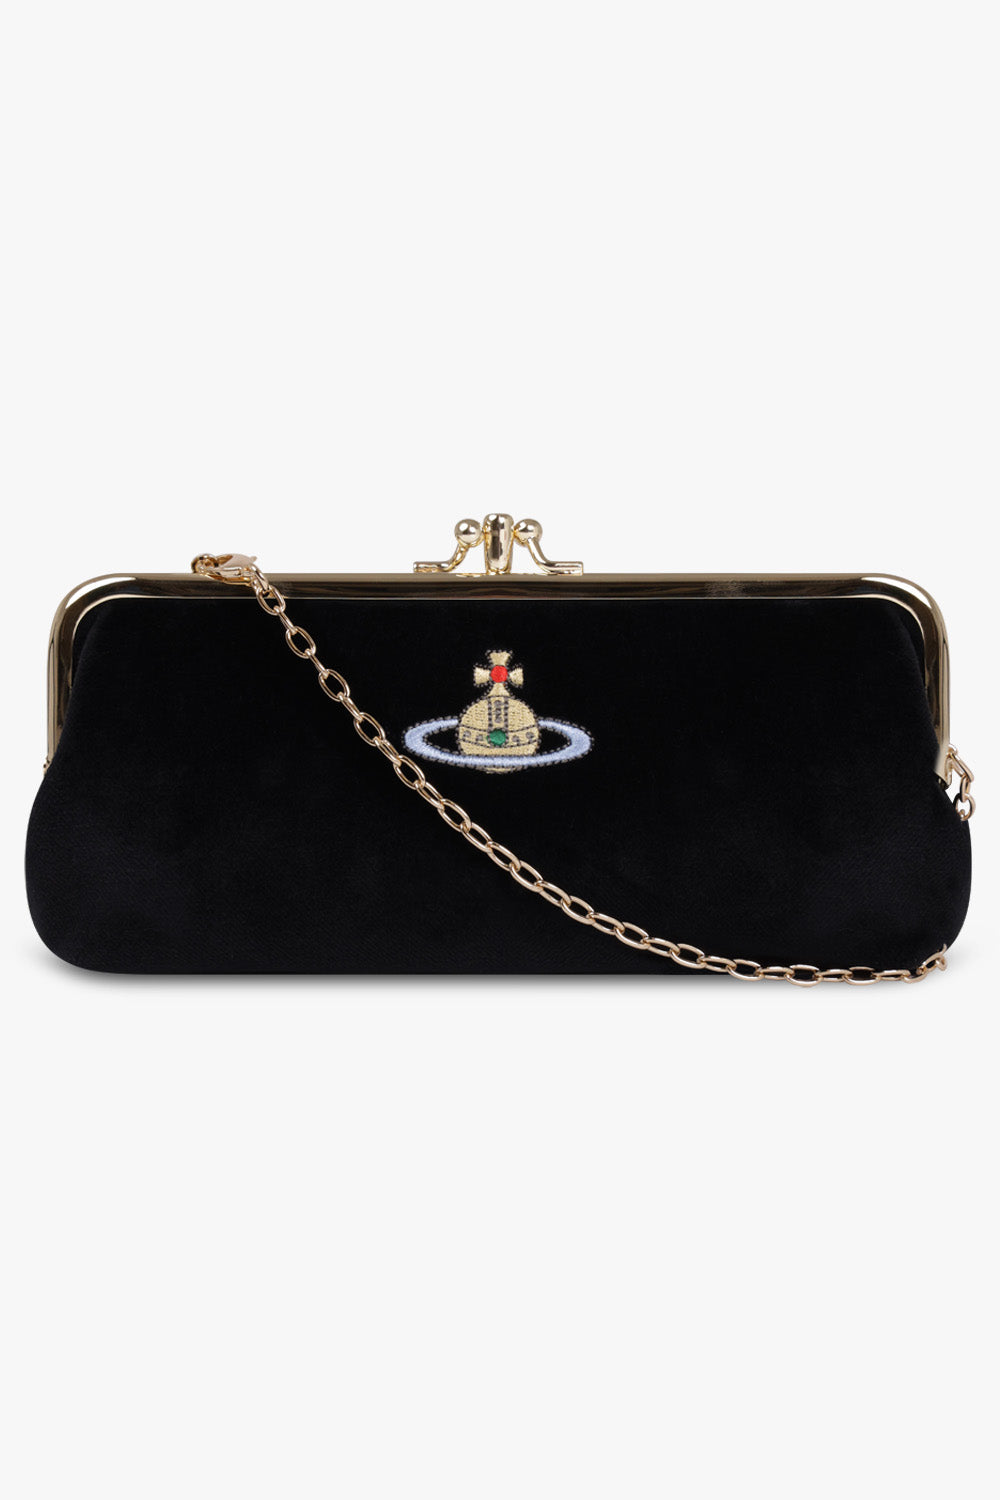 VIVIENNE WESTWOOD EMBROIDERED ORB DOUBLE FRAME PURSE BLACK